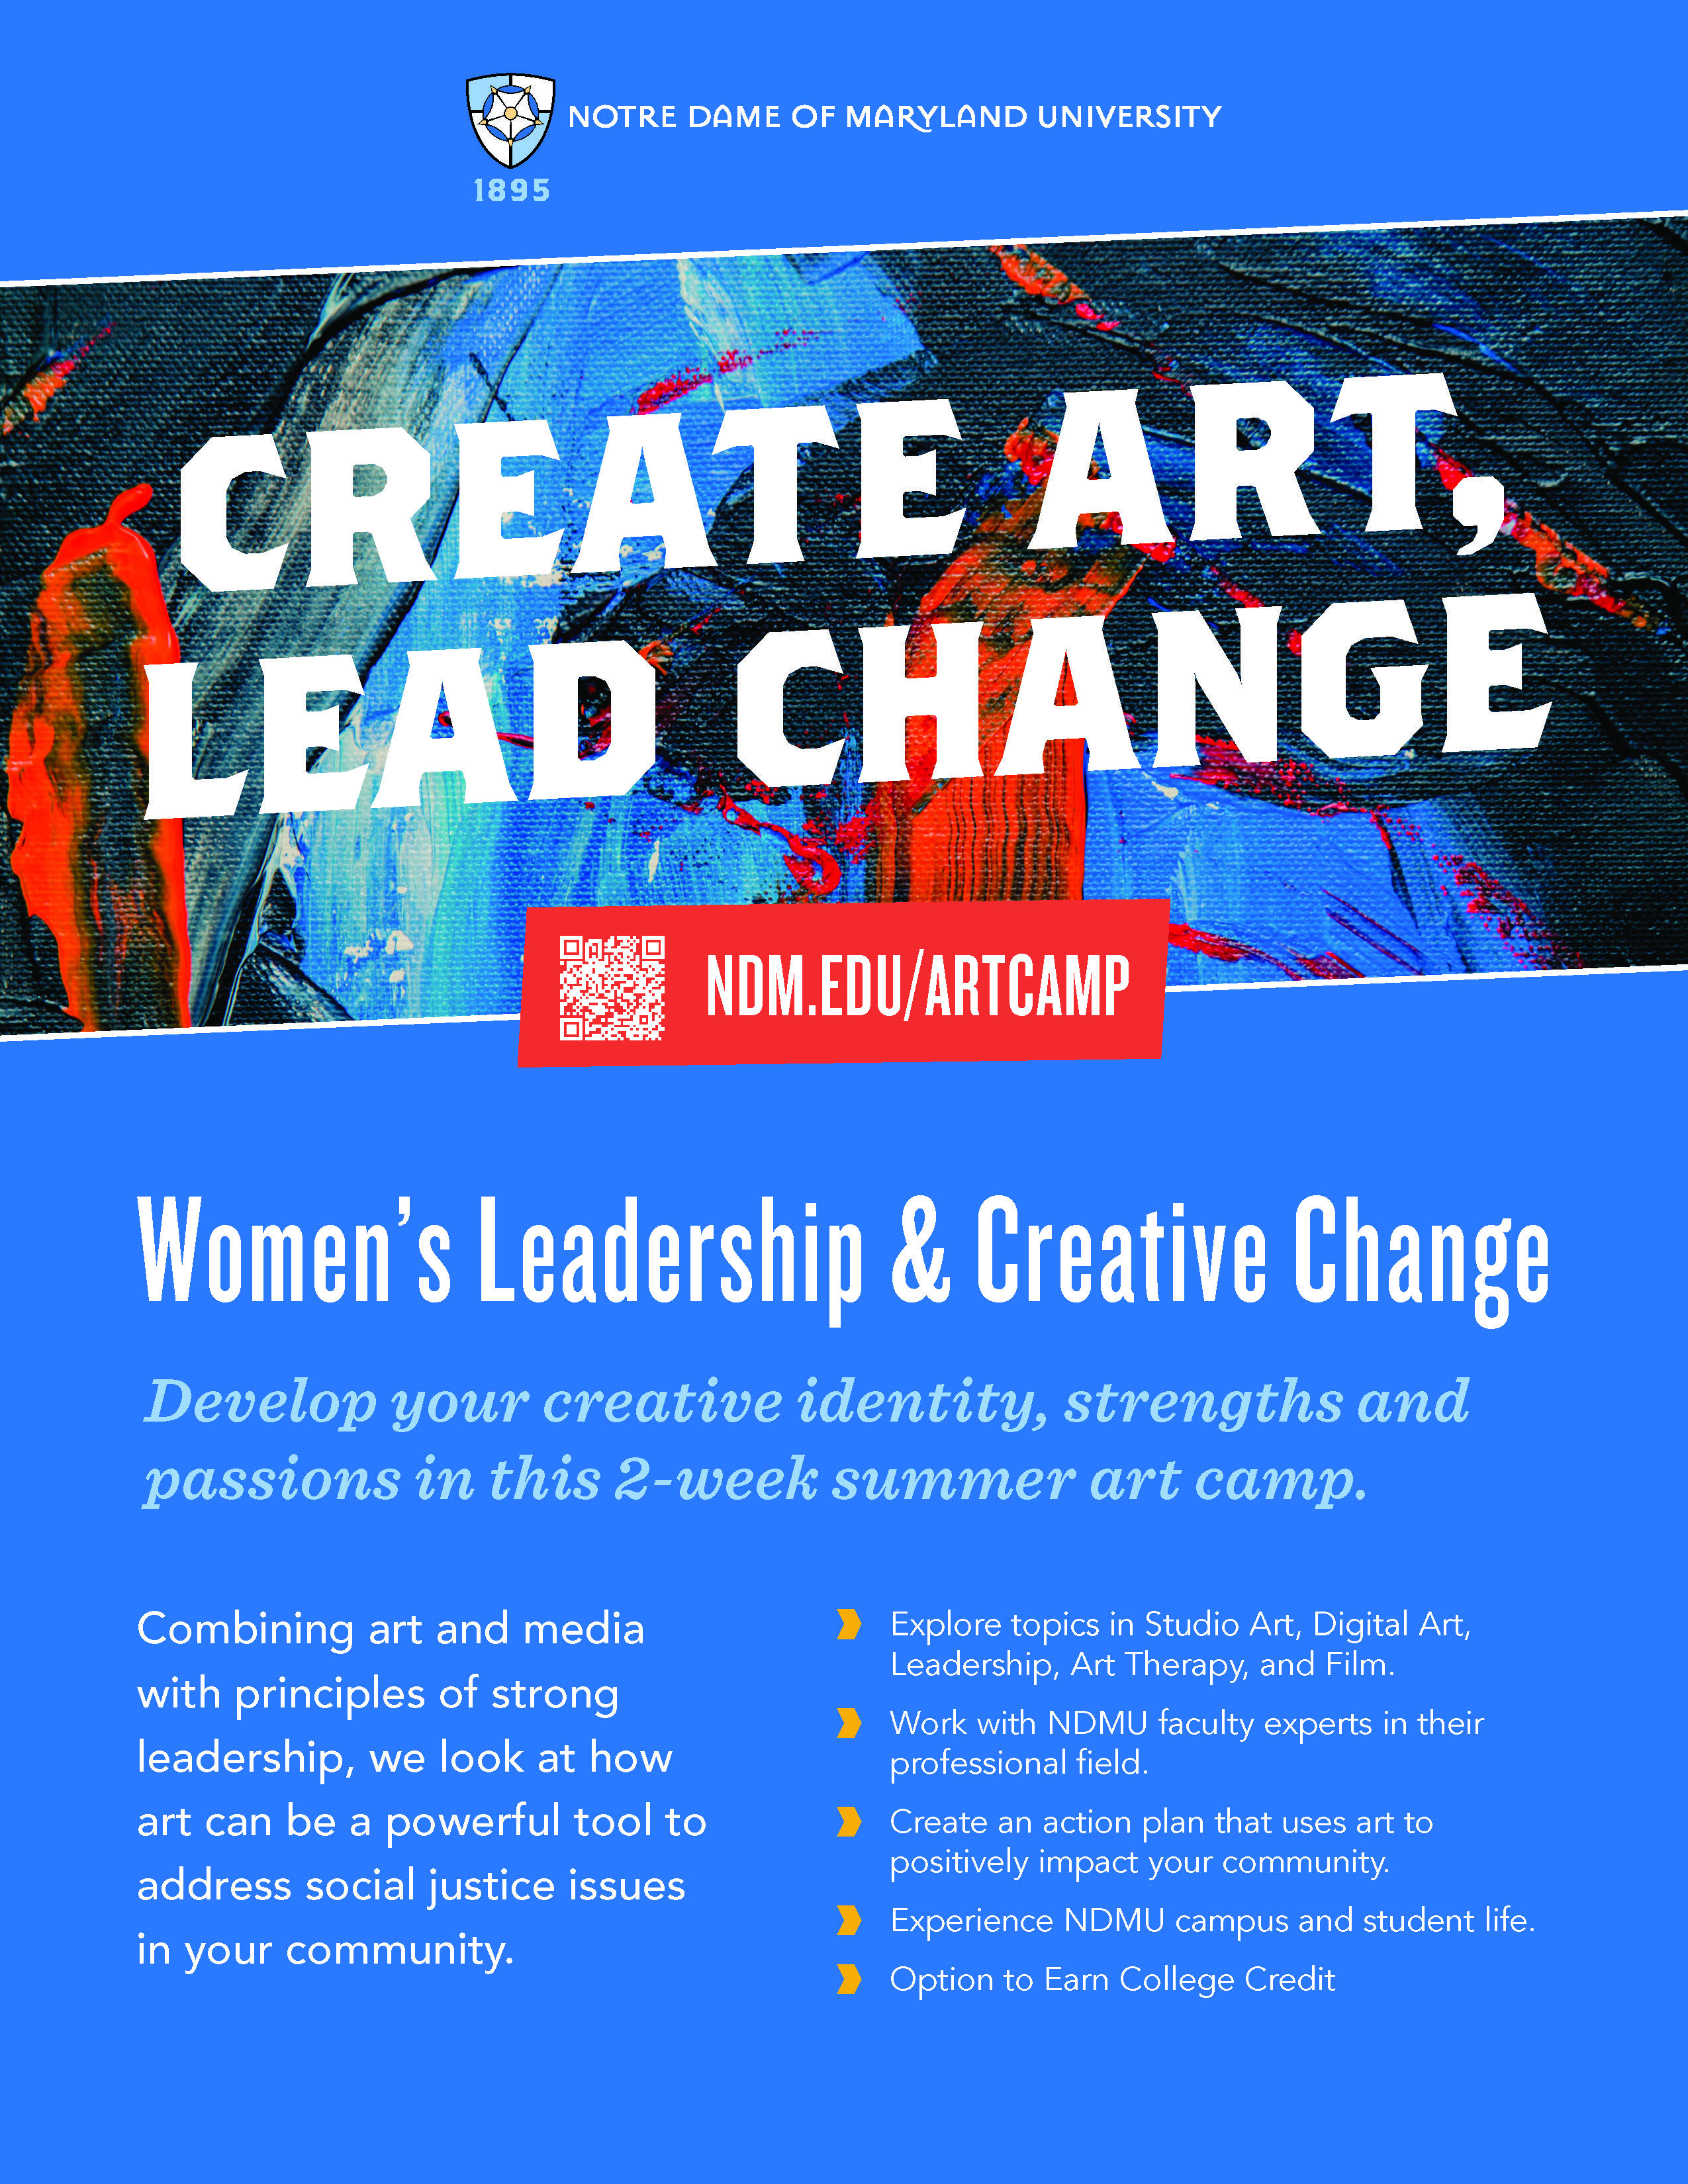 Create Art, Lead Change Art Camp at Notre Dame of Maryland University